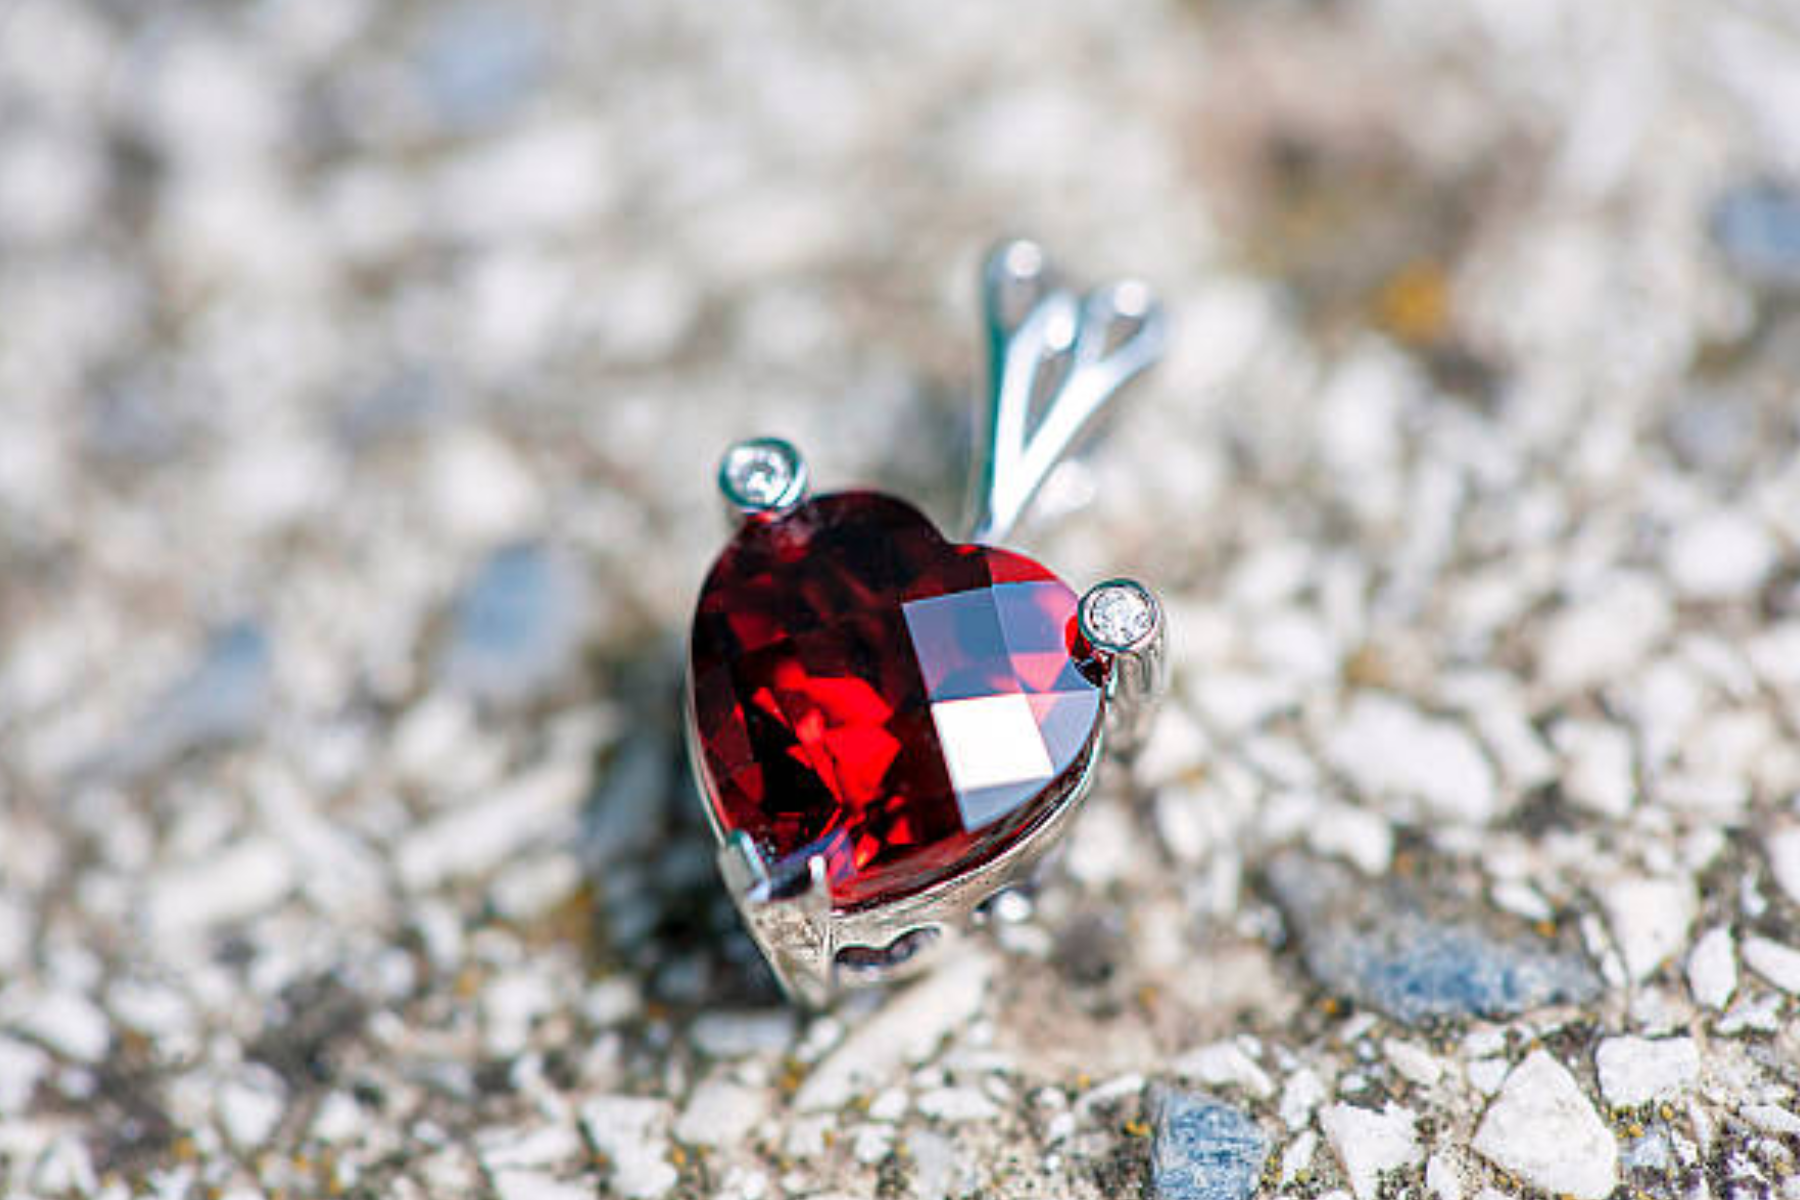 A garnet stone pendant placed in a rocky setting